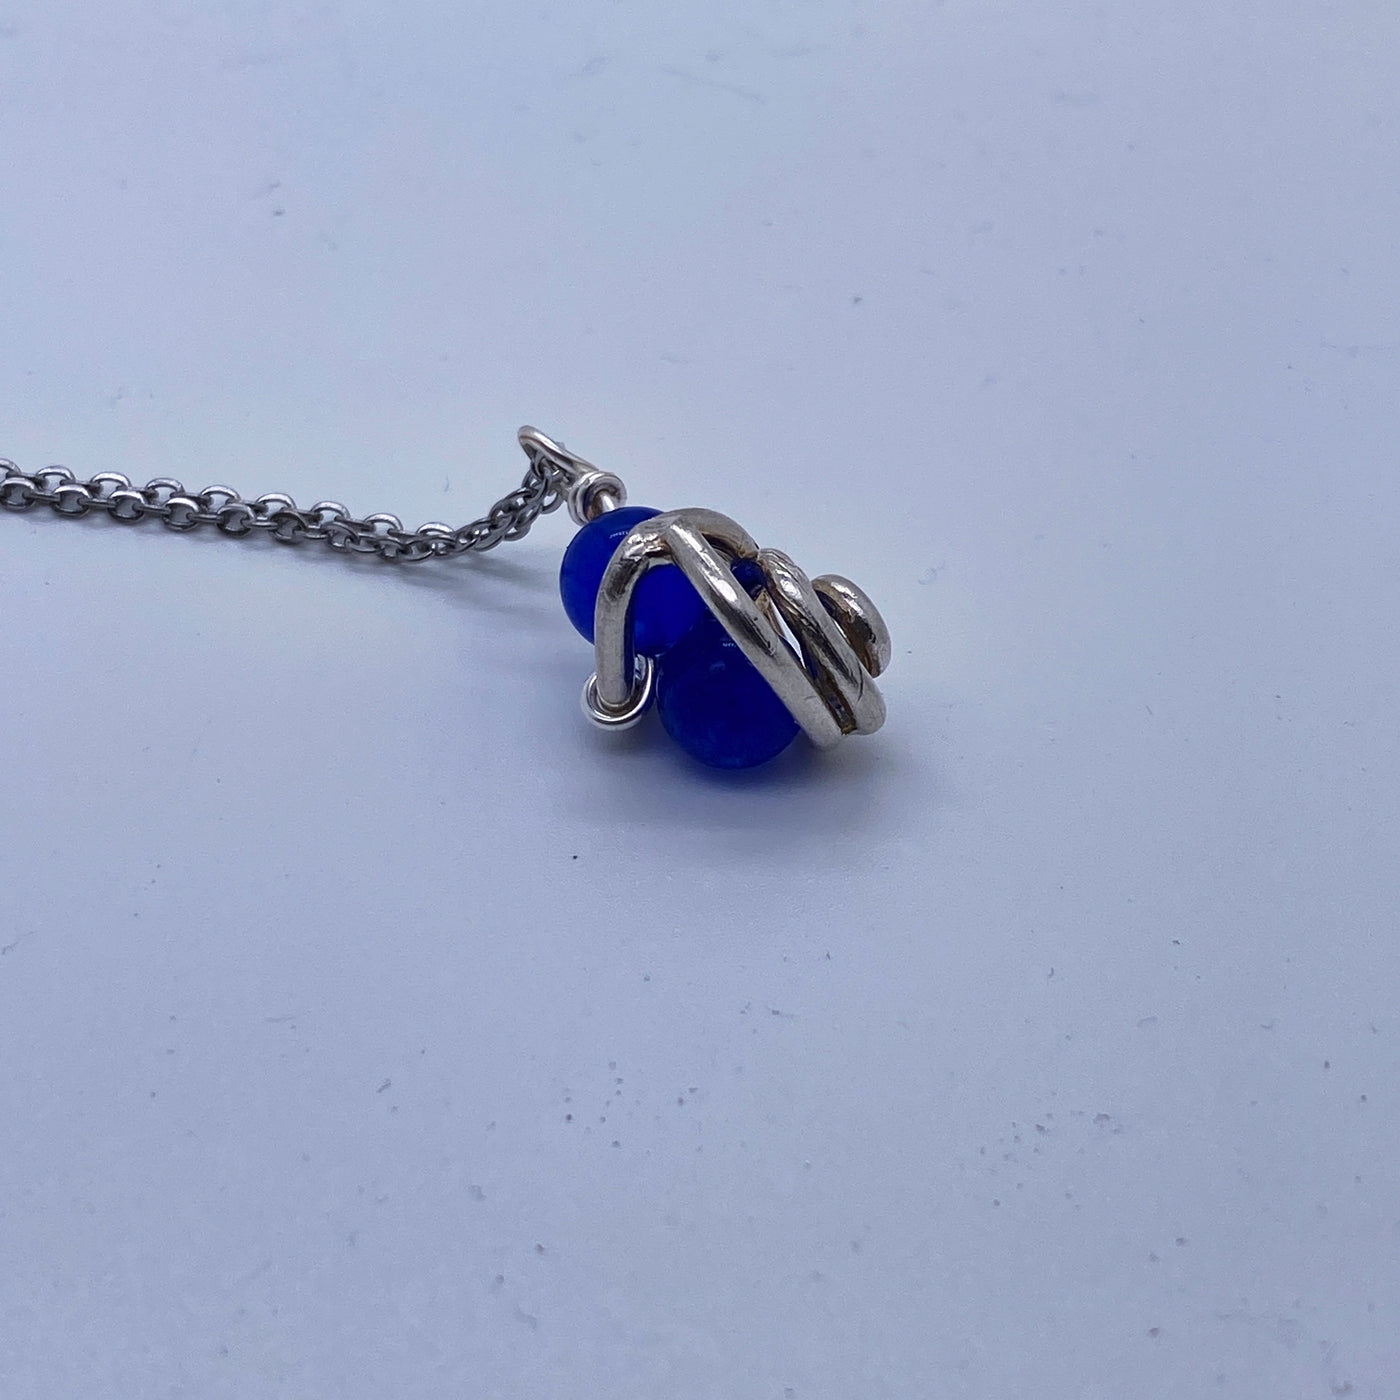 Blue calchedony agate in silver cage